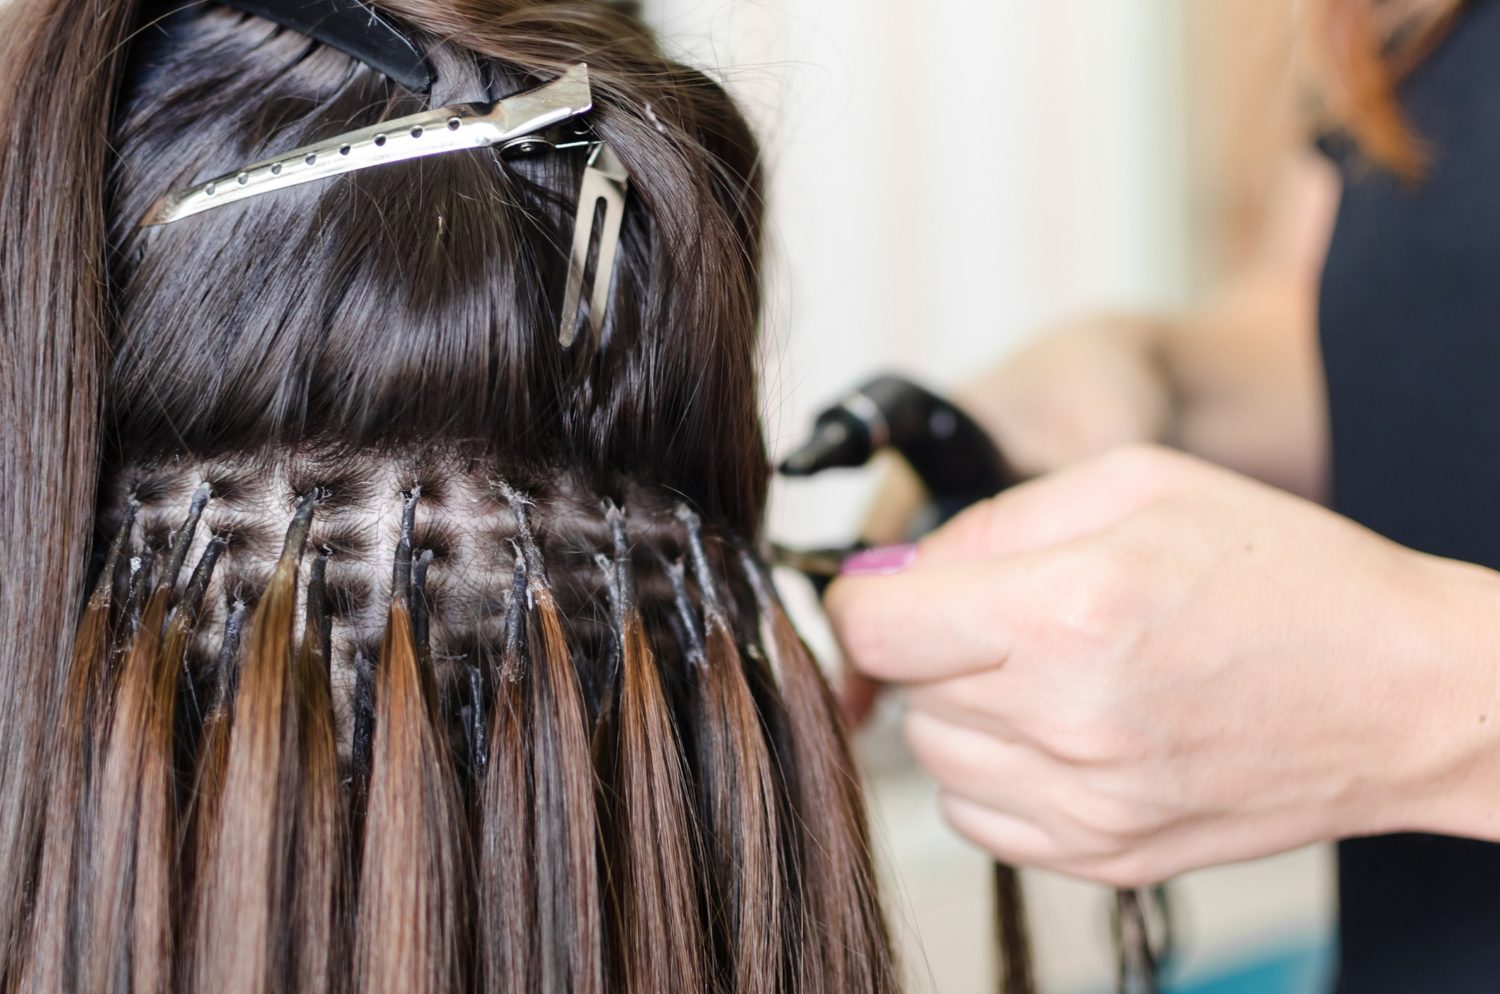 Do Hair Extensions Cause Damage?